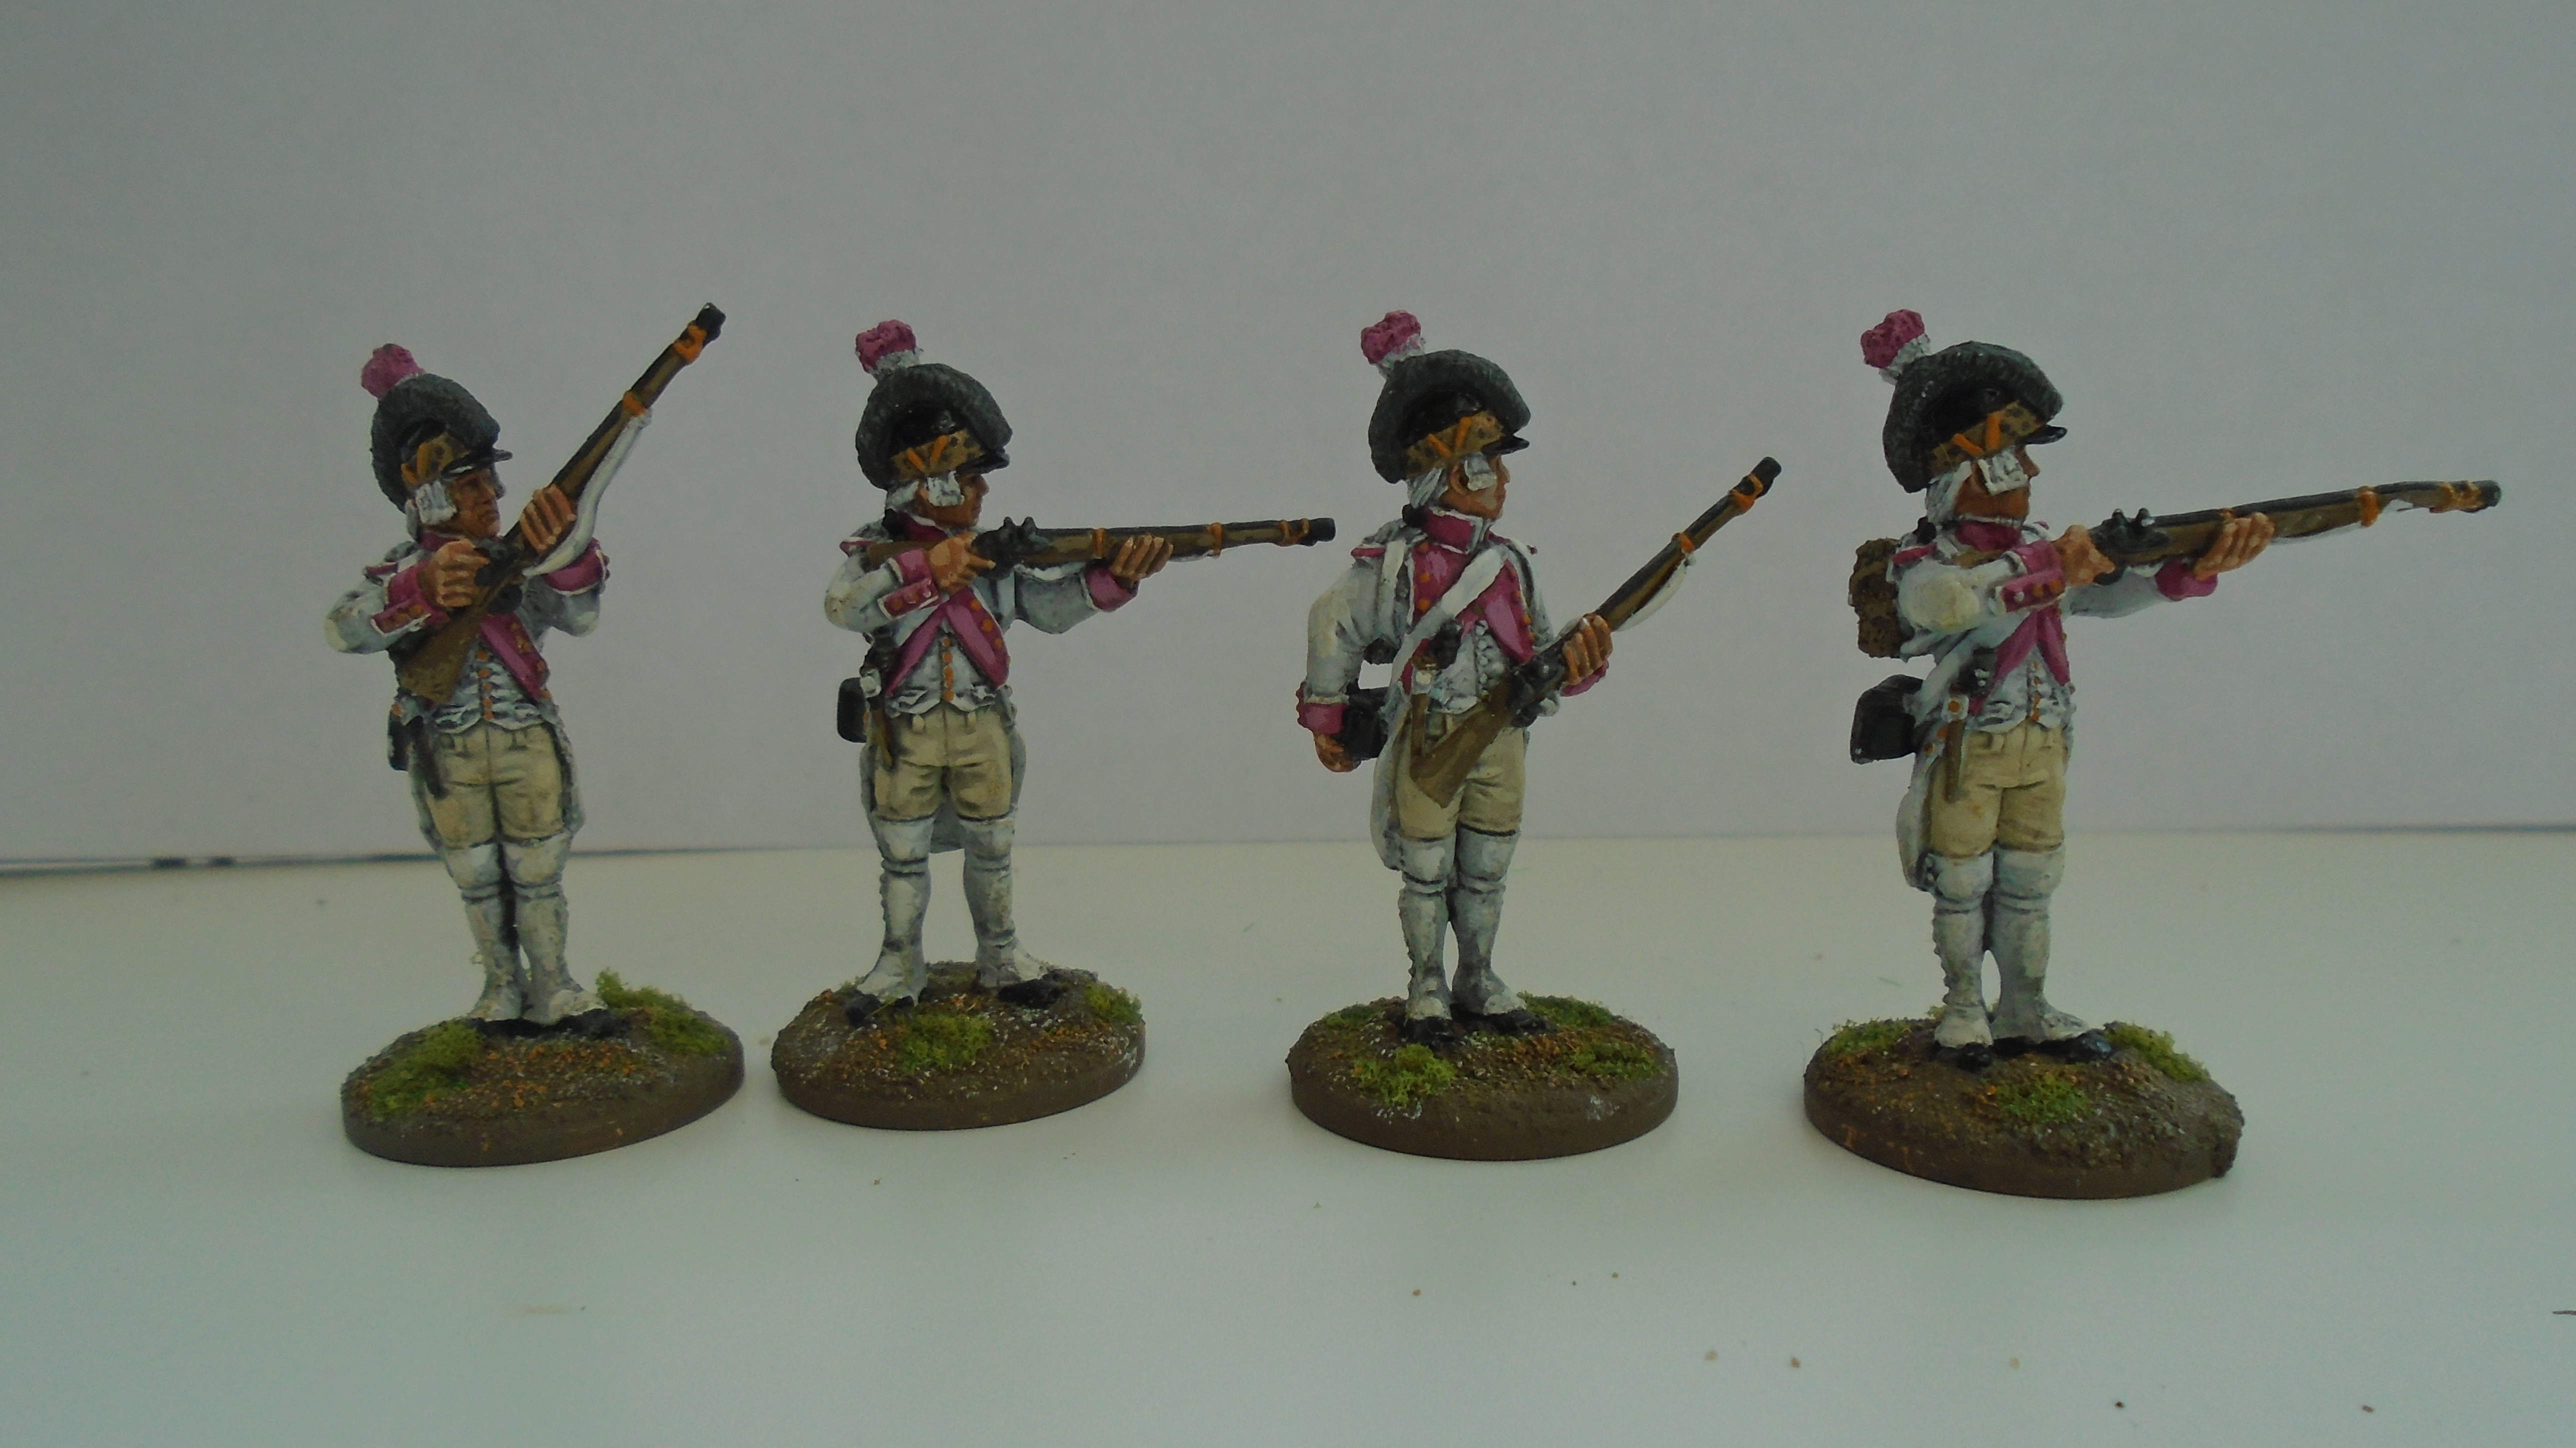 Firing line Soldiers of the Ancien Regime unit